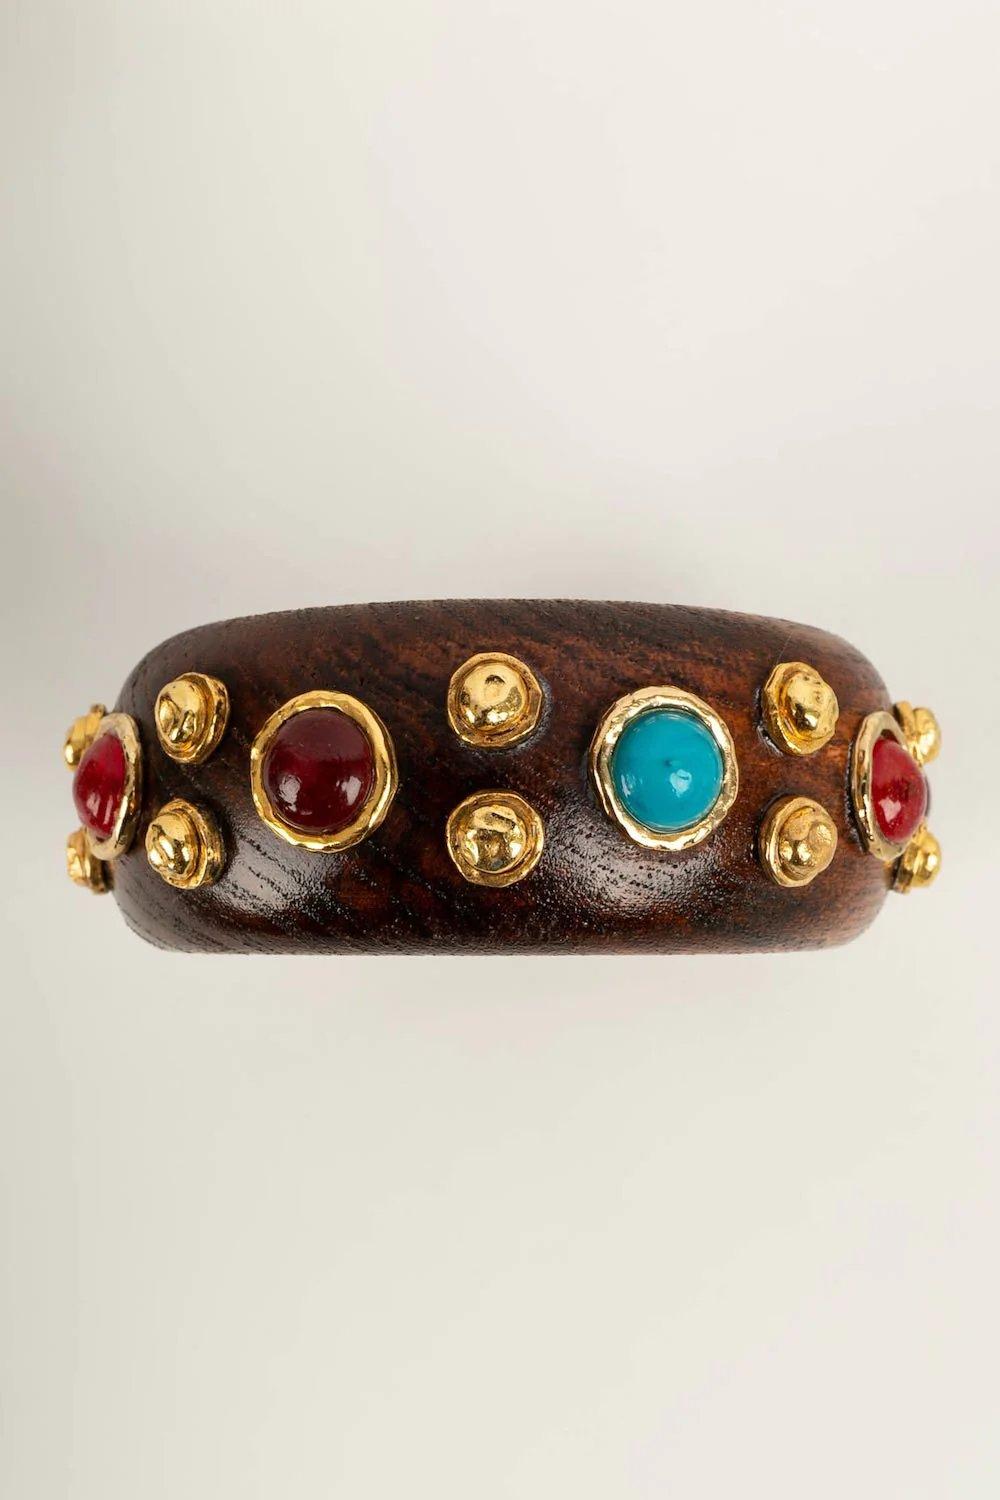 Chanel -(Made in France) Wooden and golden metal bracelet paved with multicolored cabochons.

Additional information:

Dimensions: Diameter: 7 cm 
Circumference: 20.5 cm

Condition: Very good condition

Seller Ref number: BRAB163